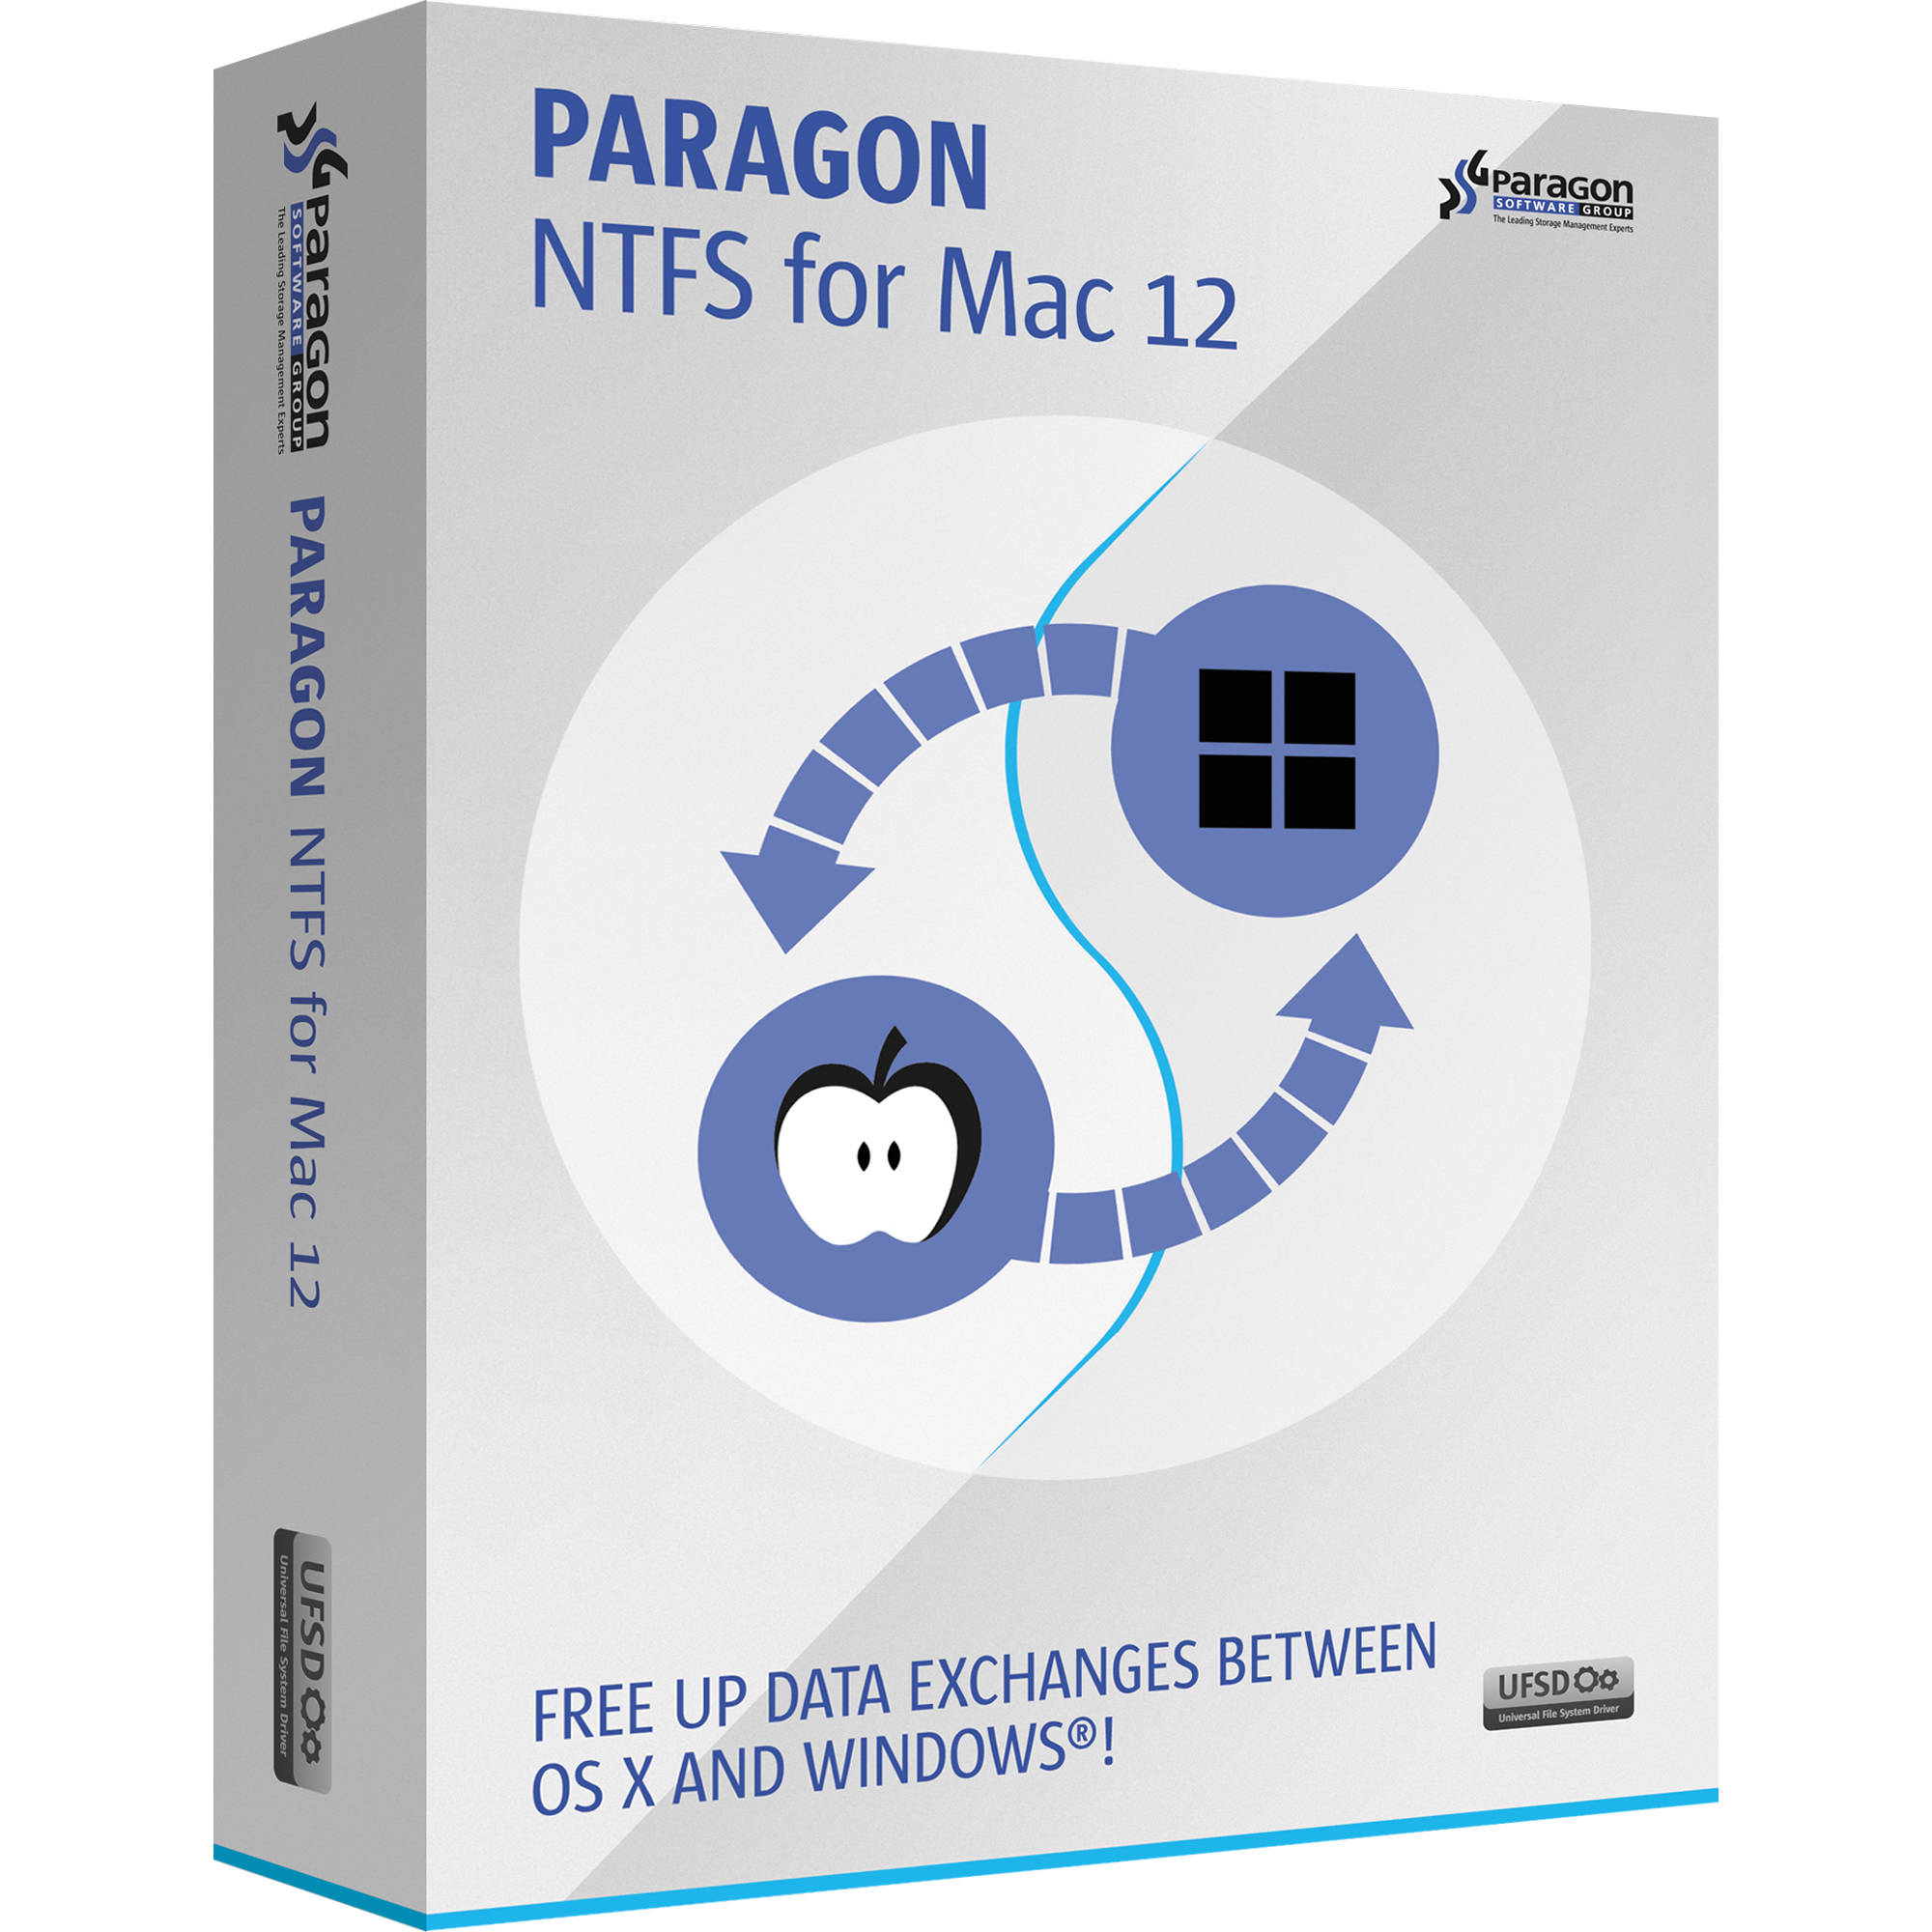 ntfs or hfs for mac